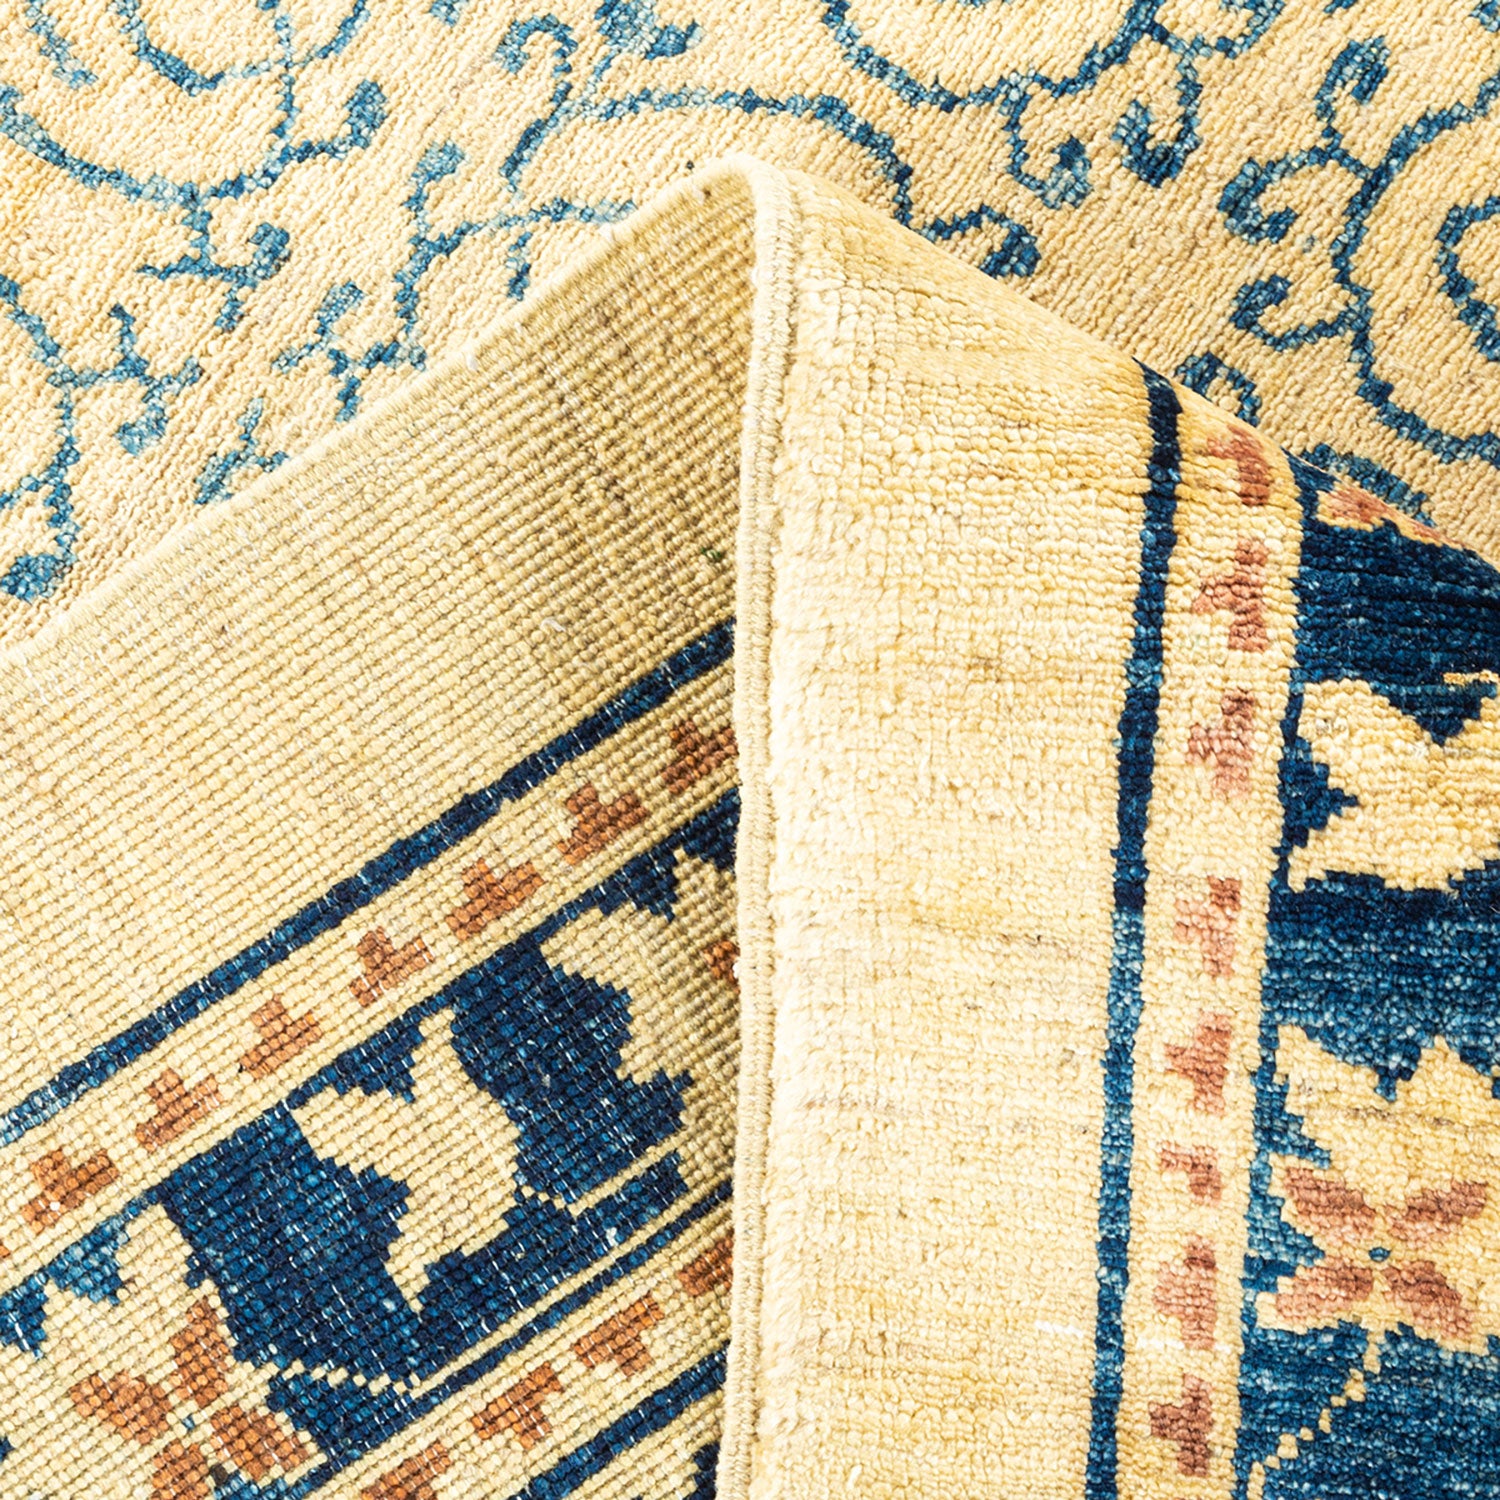 Close-up of folded area rug with intricate traditional floral design.